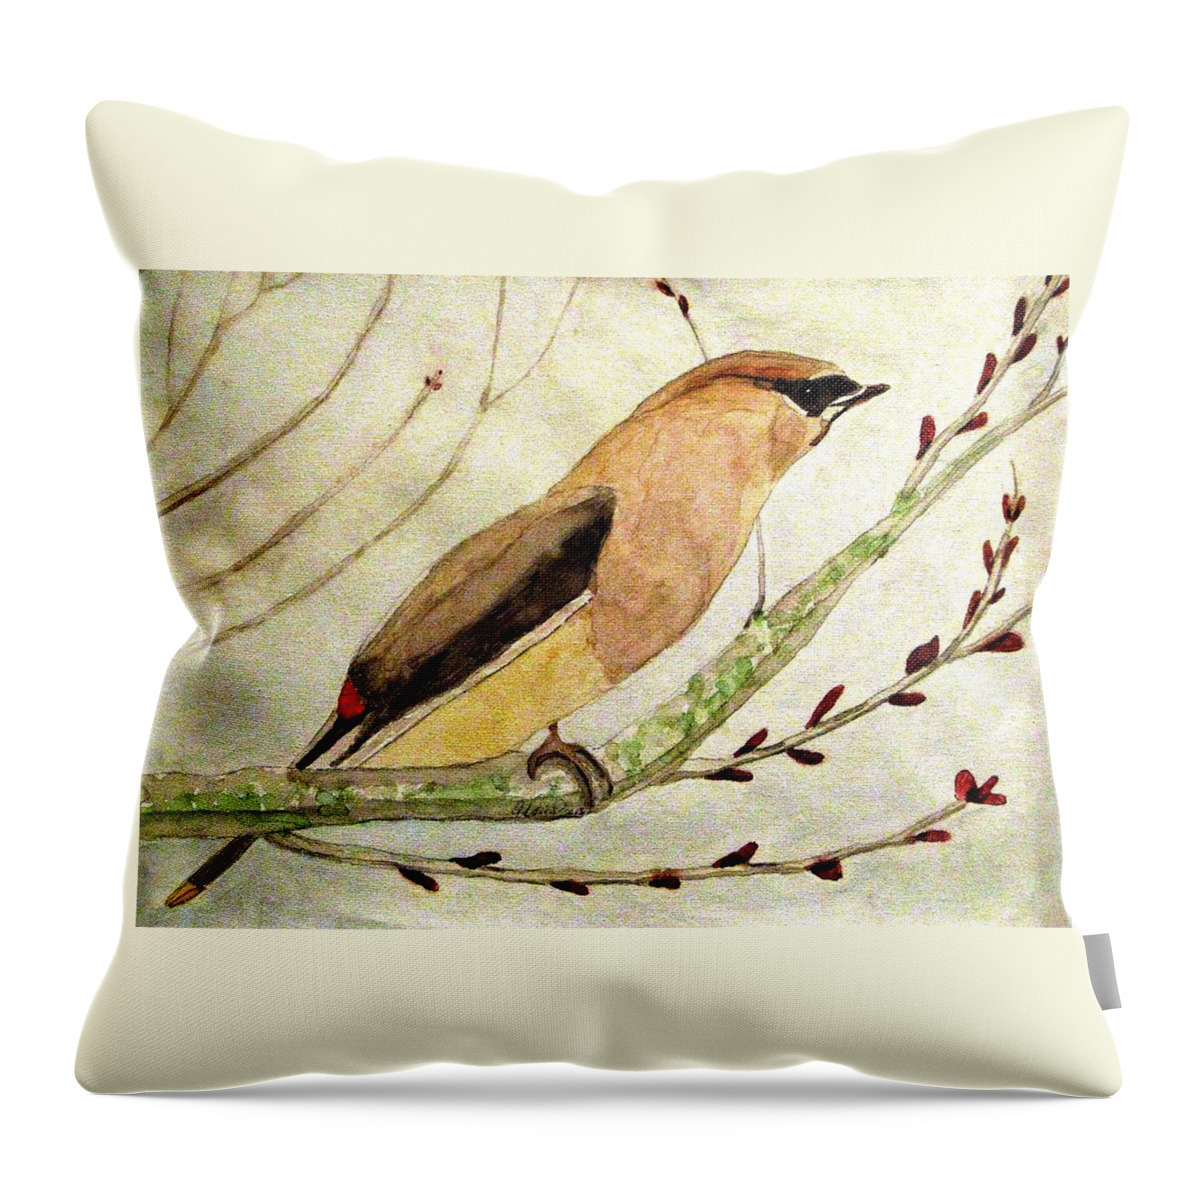 Waxwings Throw Pillow featuring the painting A Waxwing In The Orchard by Angela Davies